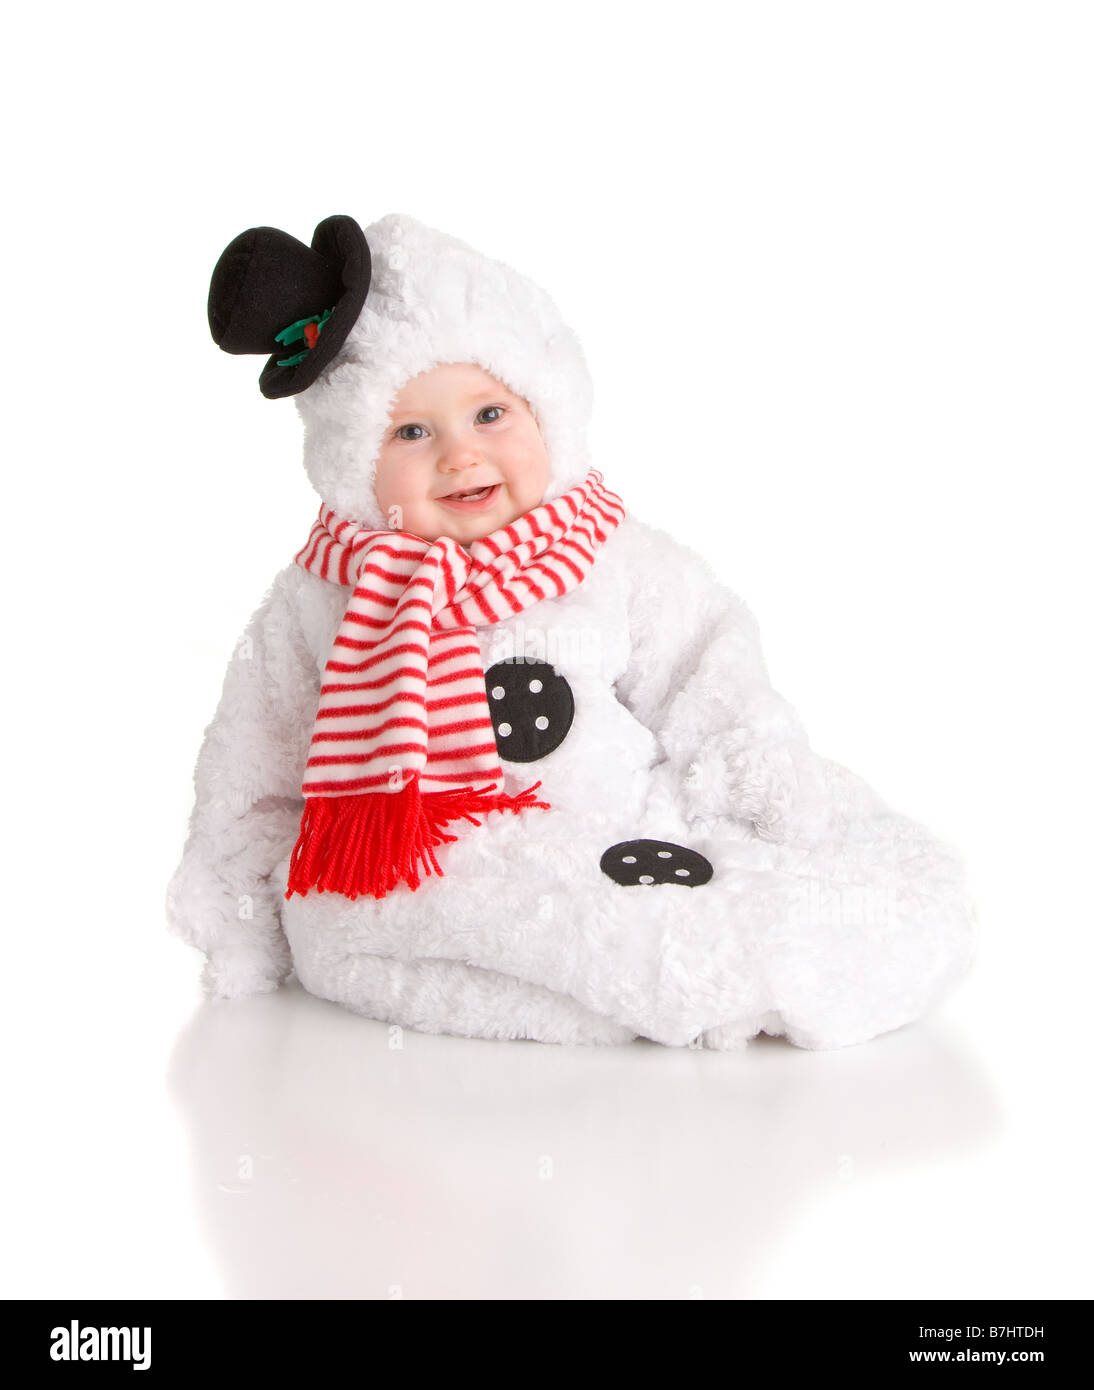 Baby in a snowman costume on high key white background Stock Photo - Alamy